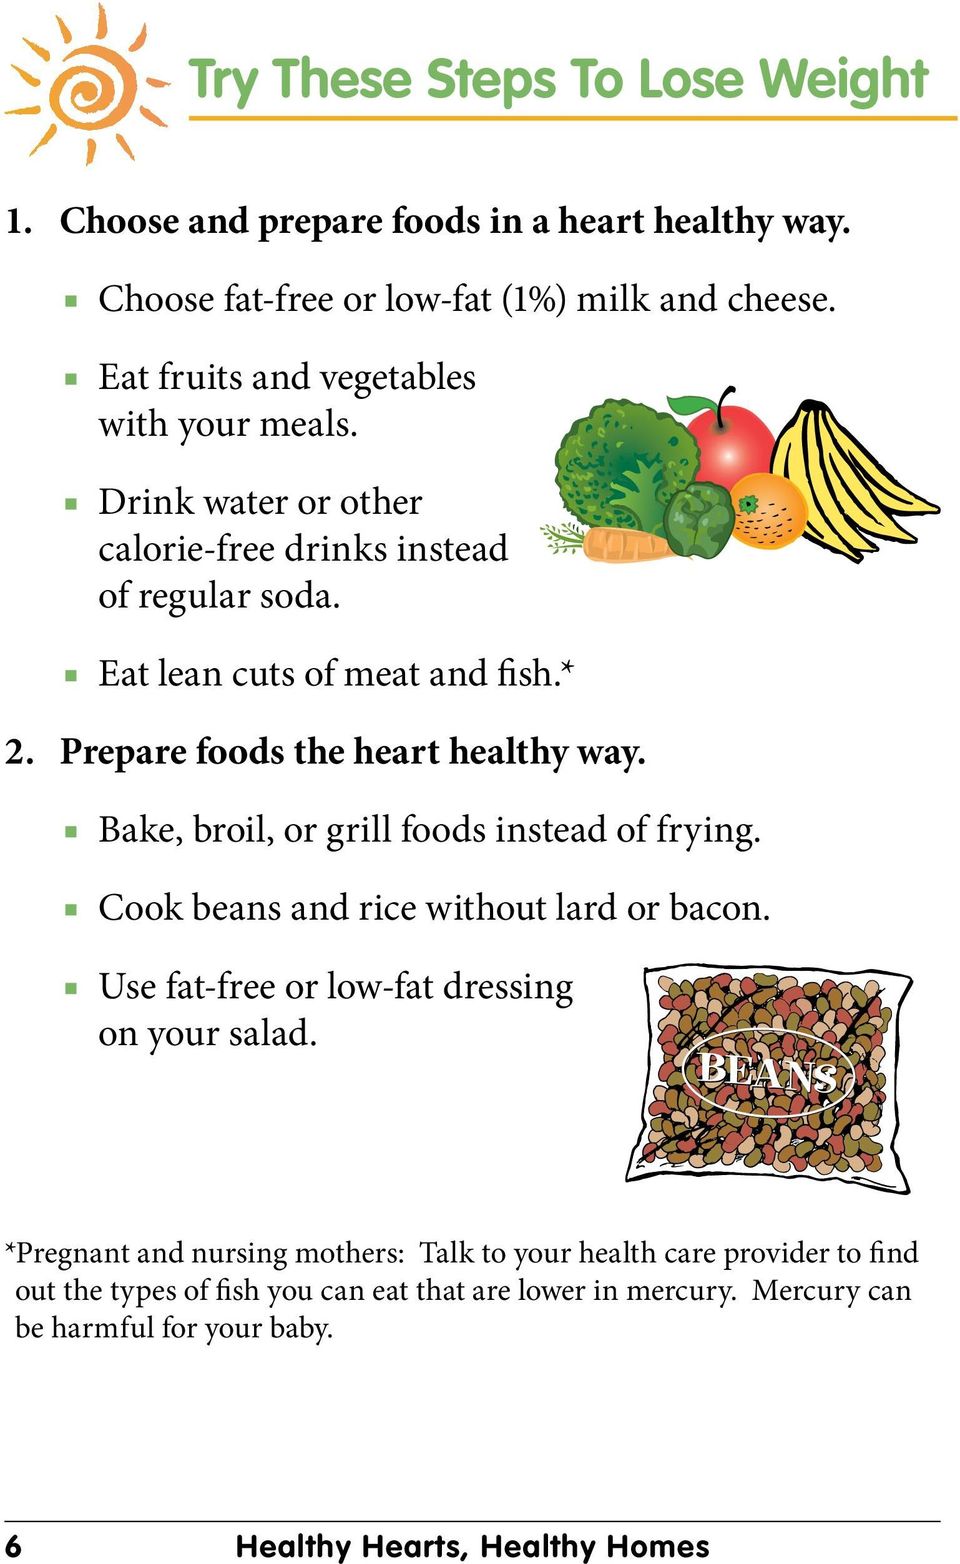 Prepare foods the heart healthy way. Bake, broil, or grill foods instead of frying. Cook beans and rice without lard or bacon.